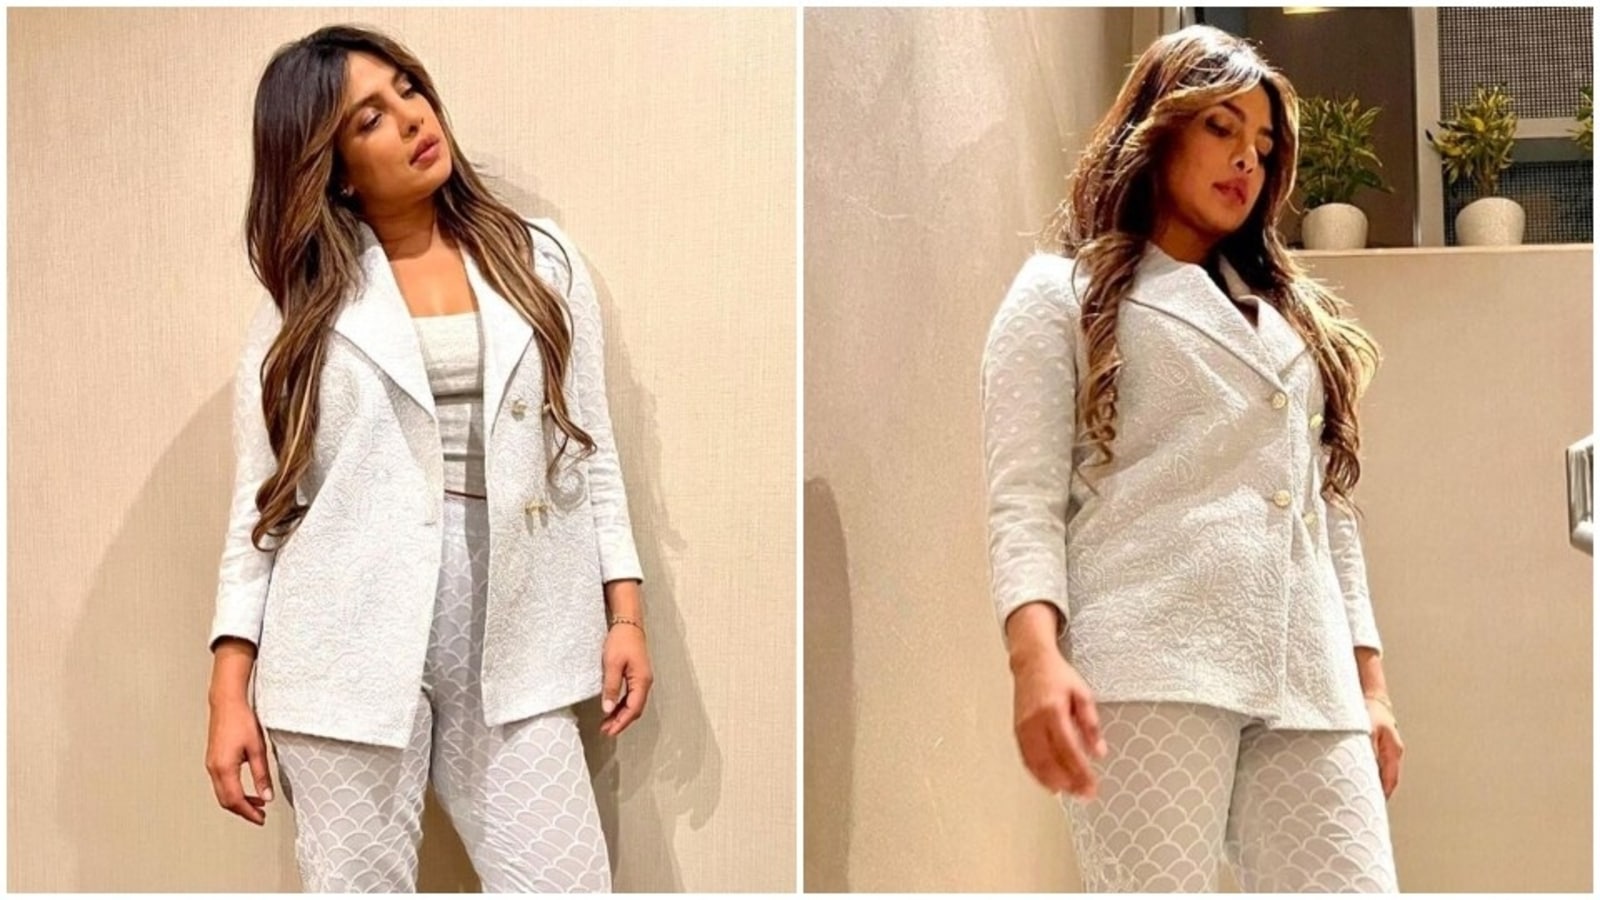 Priyanka Chopra in handcrafted chikankari pantsuit mixes Indian traditional design with ‘hot boss babe’ look: All pics